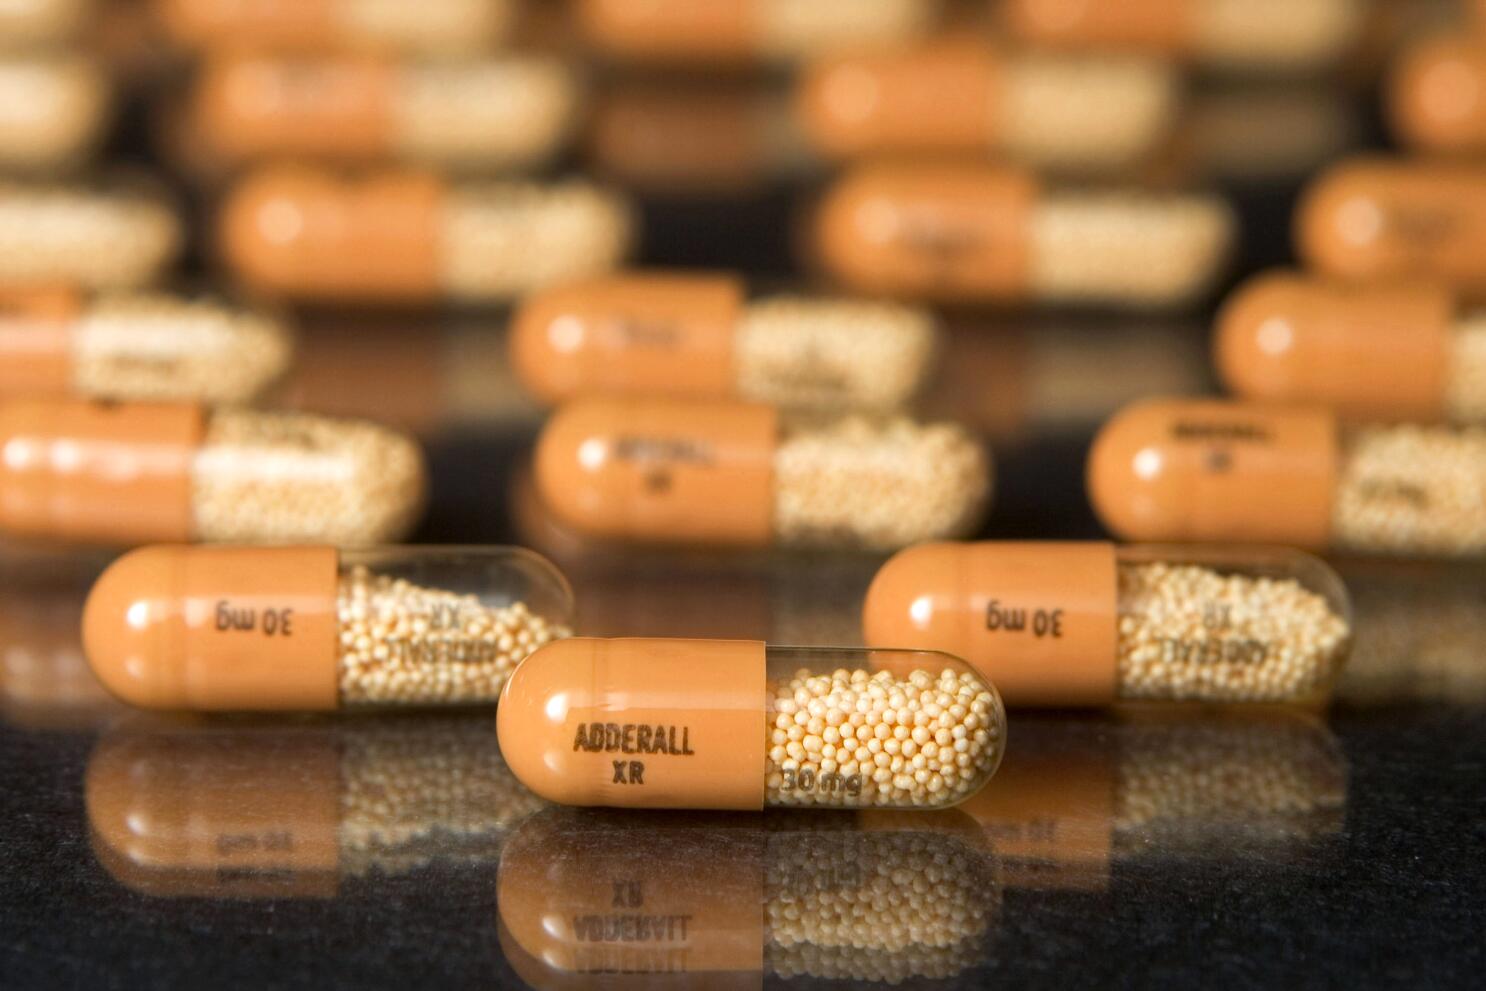 Deadly Drugs Pressed Into Pills, Made To Look Like Adderall: DA